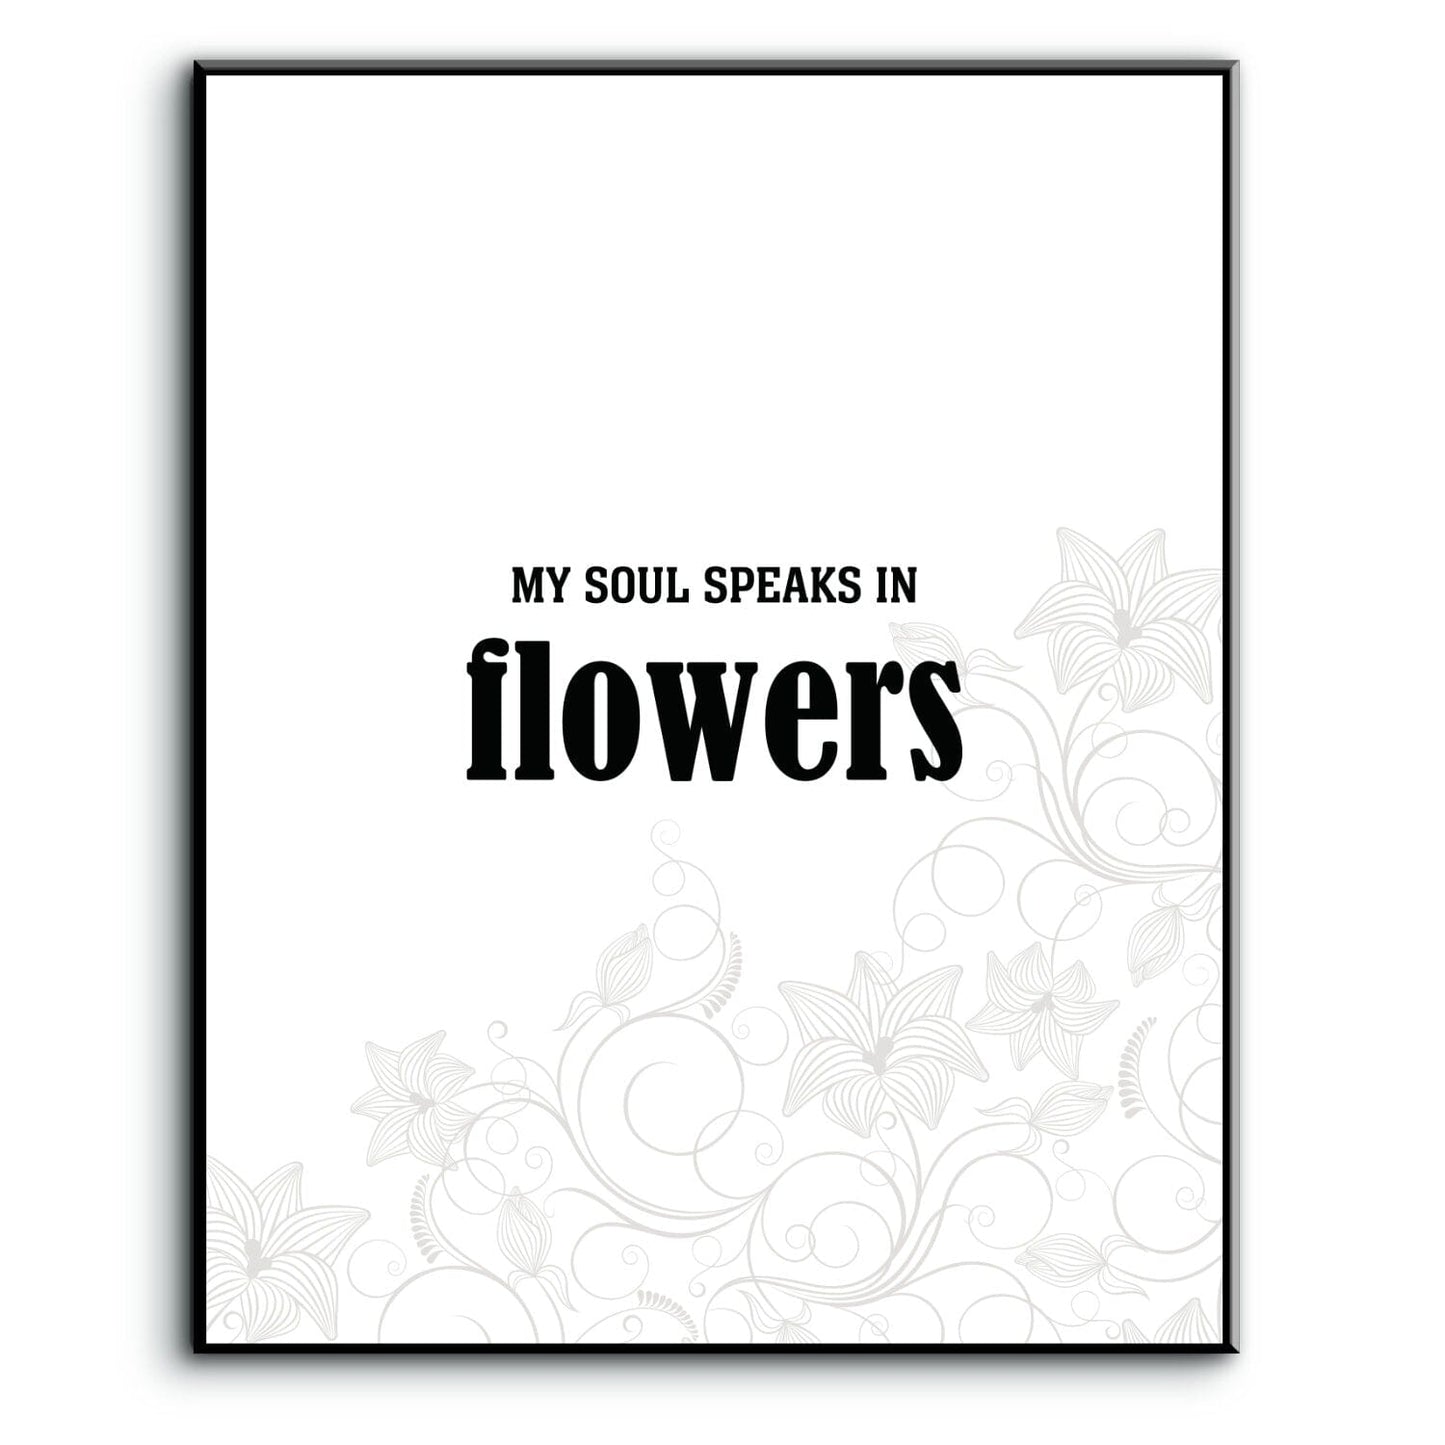 My Soul Speaks in Flowers - Wise and Witty Quote Wall Print Wise and Wiseass Quotes Song Lyrics Art 8x10 Plaque Mount 